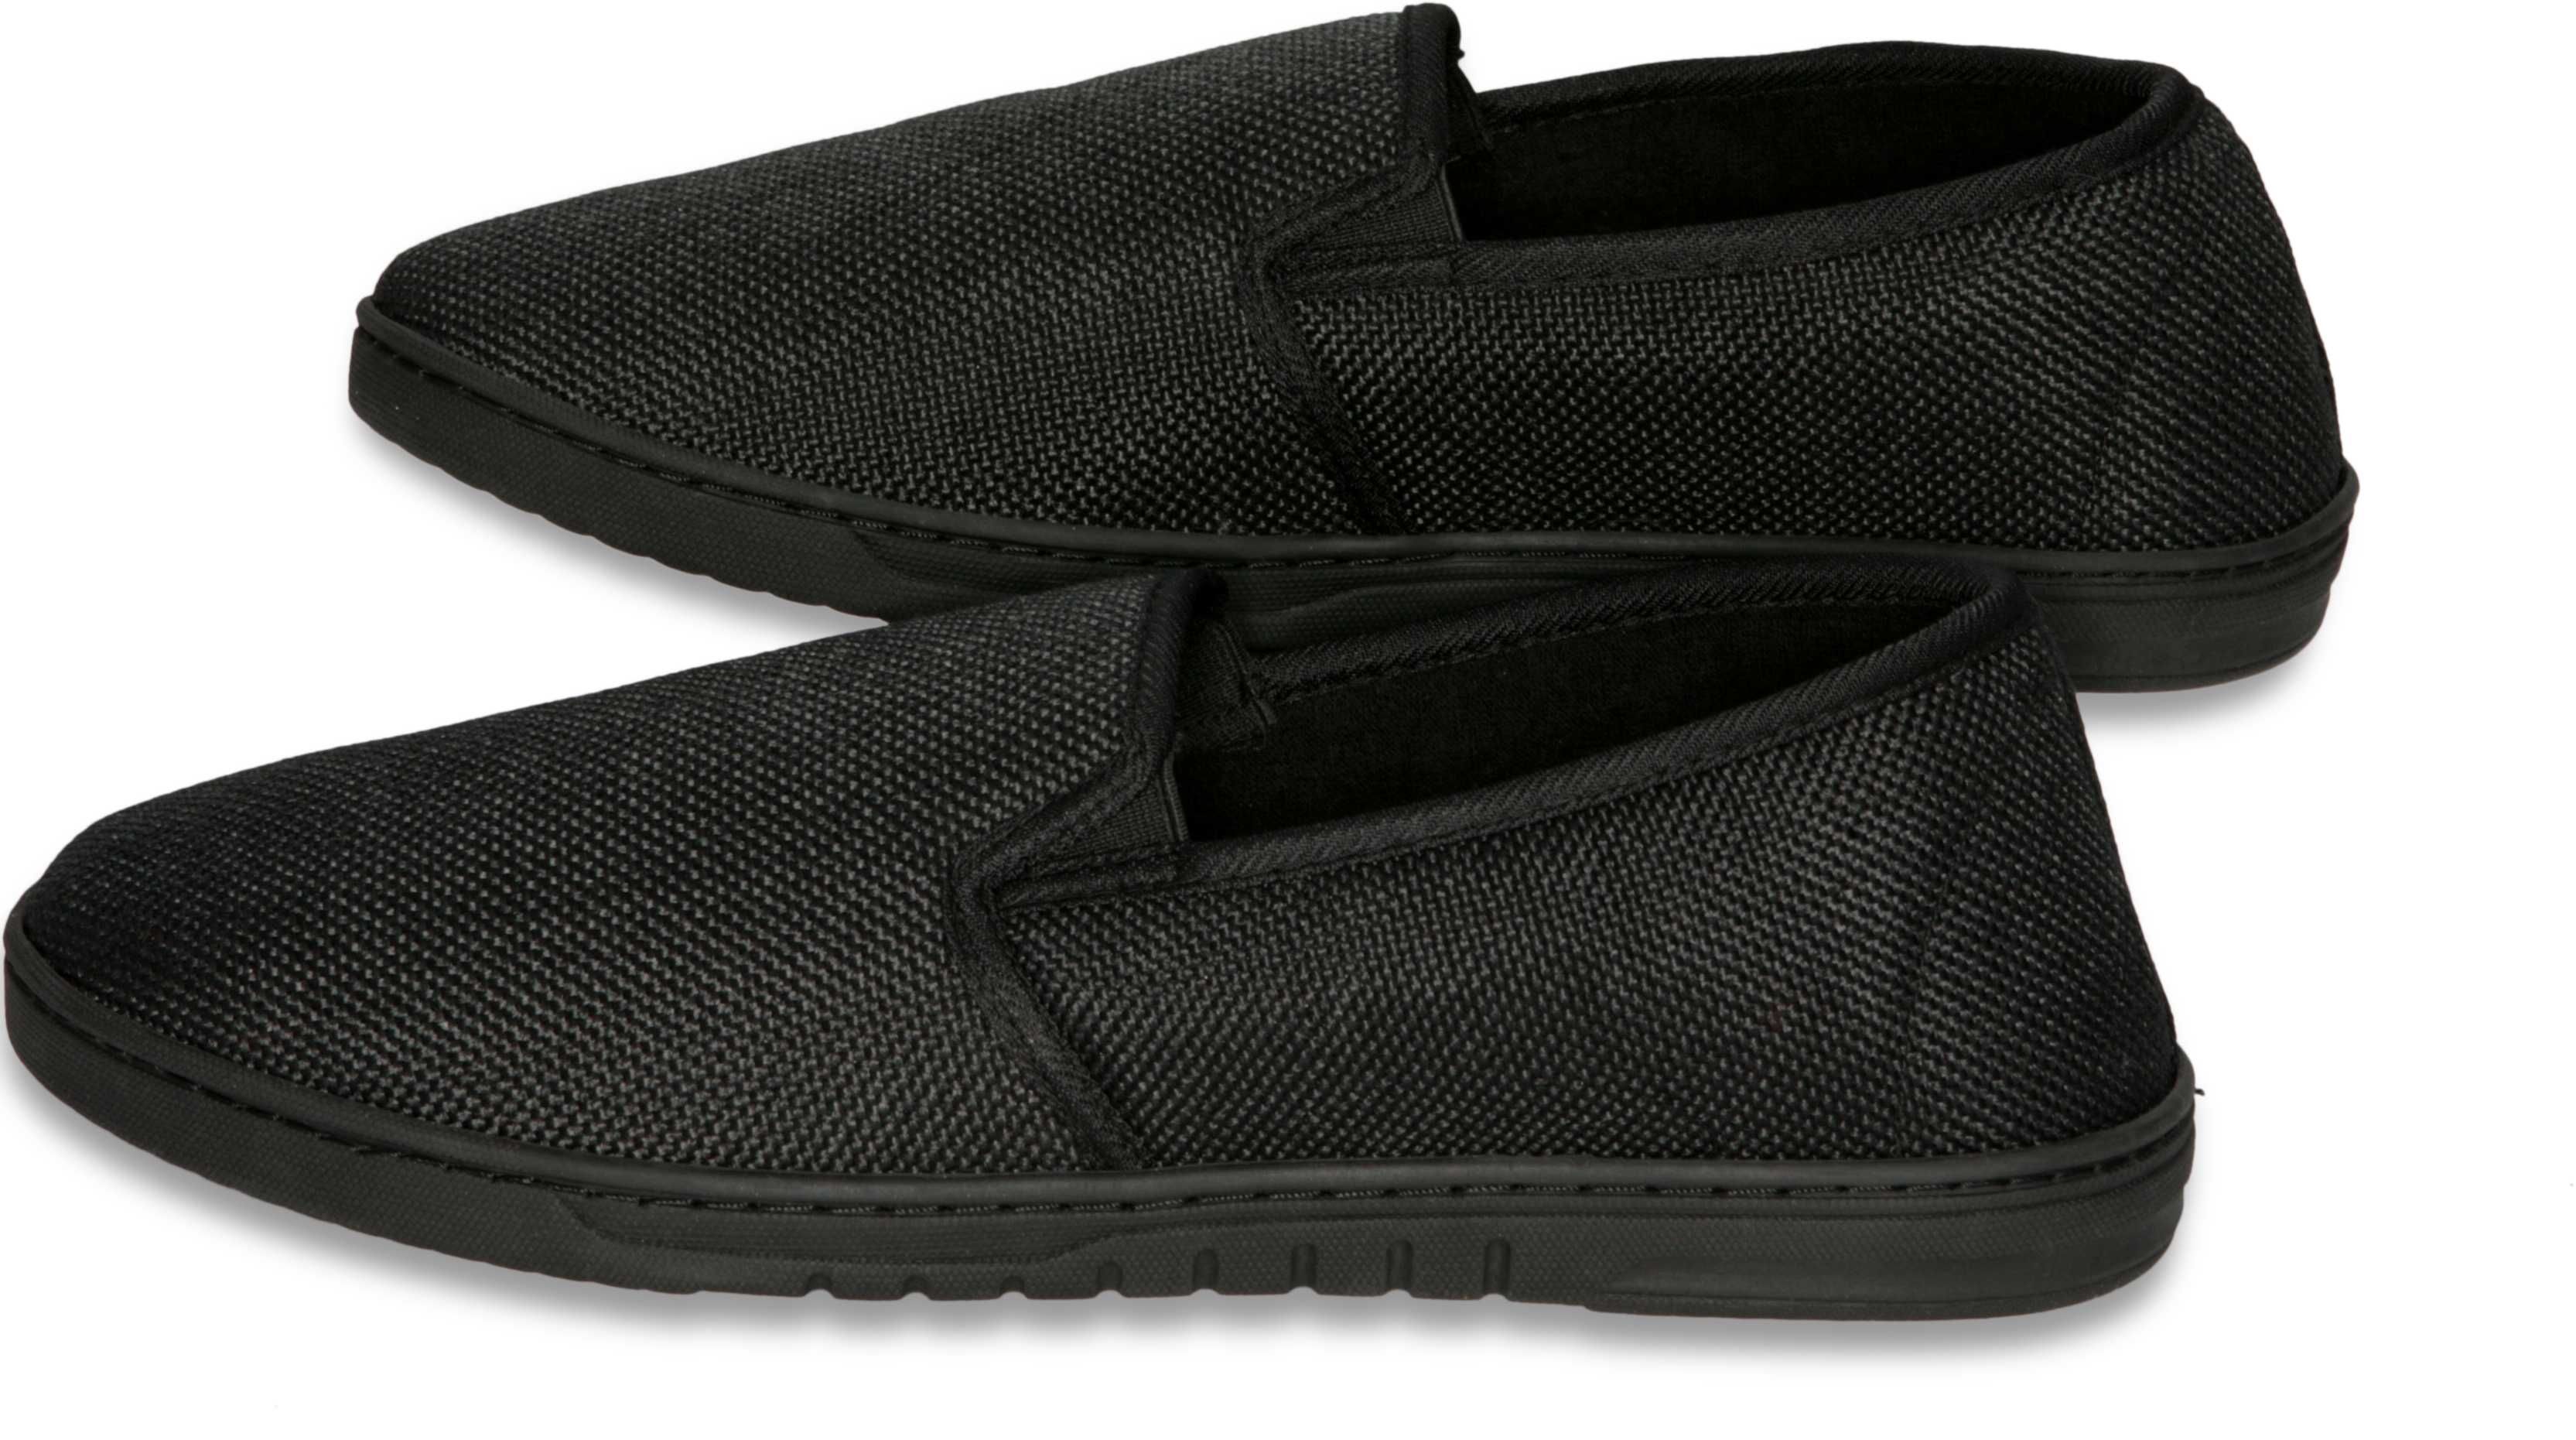 Deluxe Comfort Men's Memory Foam Slipper, Size 11-12 - Suede Vamp Checkered Lining - Memory Foam Insole - Strong TPR Outsole - Mens Slippers, Black - image 4 of 5